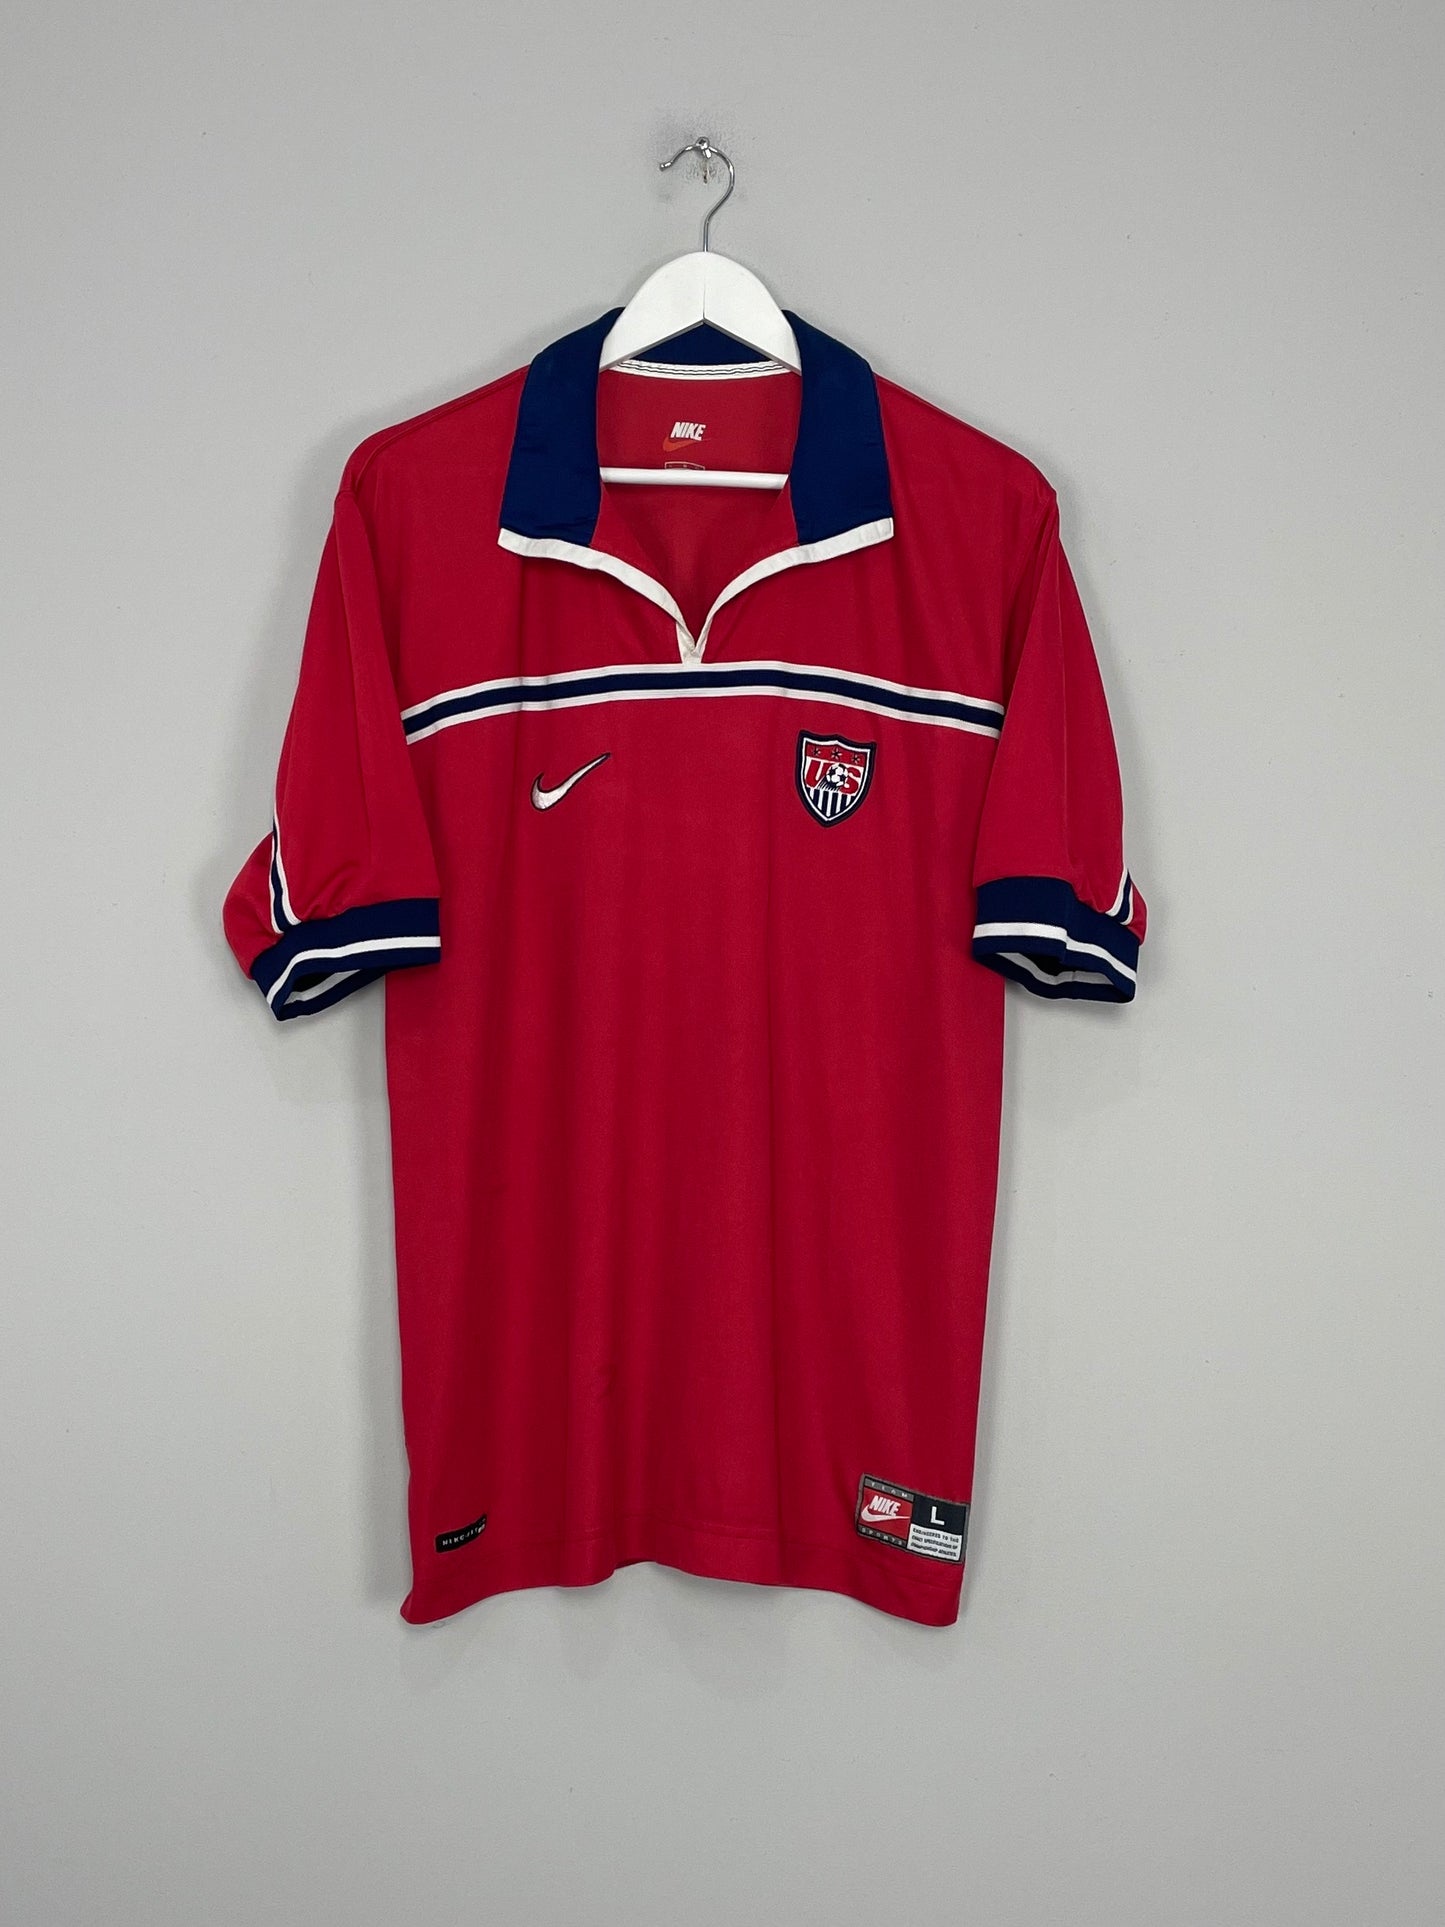 Image of the USA shirt from the 1998/99 season